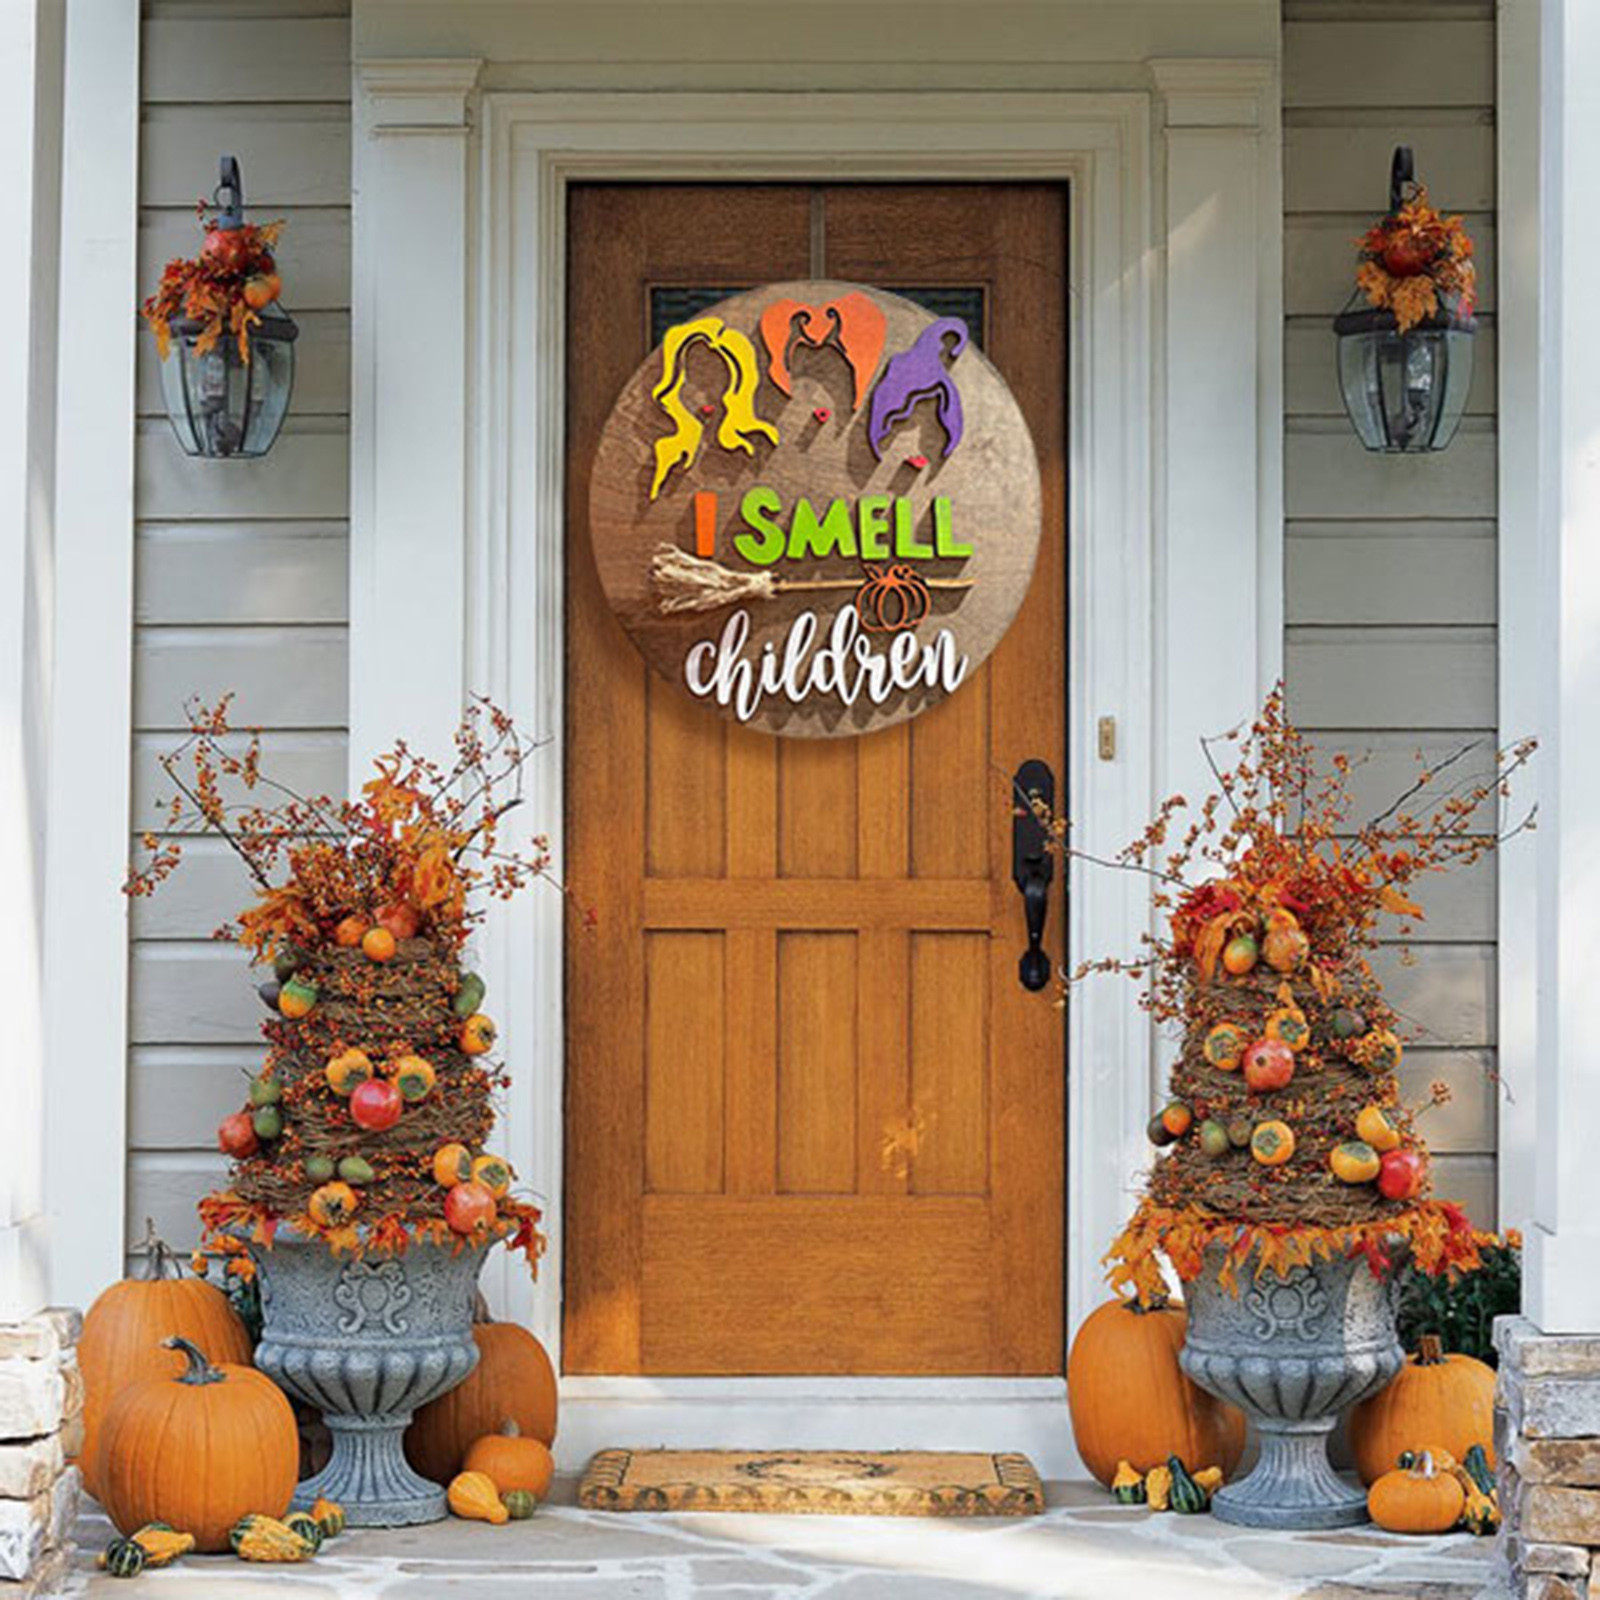 Funny Welcome Door Hanger Personalized Its Just A Bunch Of (Hocus Pocus) Decor - image 3 of 8